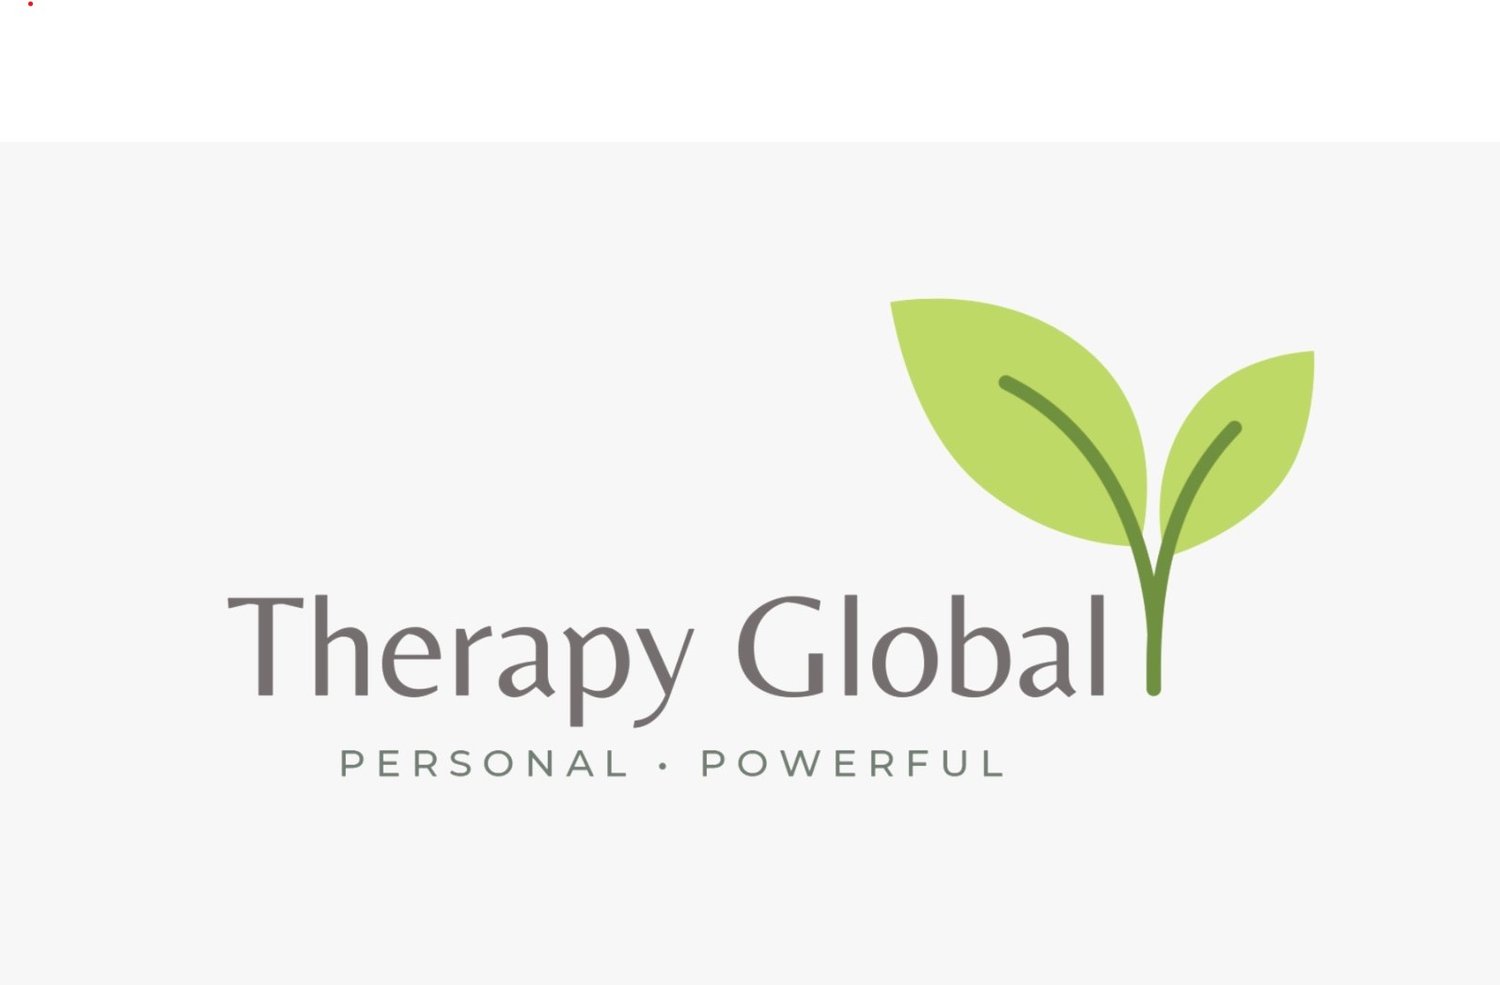 Therapy Global - Online counselling and psychotherapy services. Personal, Powerful, Affordable therapy for stress, anxiety, depression, trauma, relationships, grief or workplace issues.